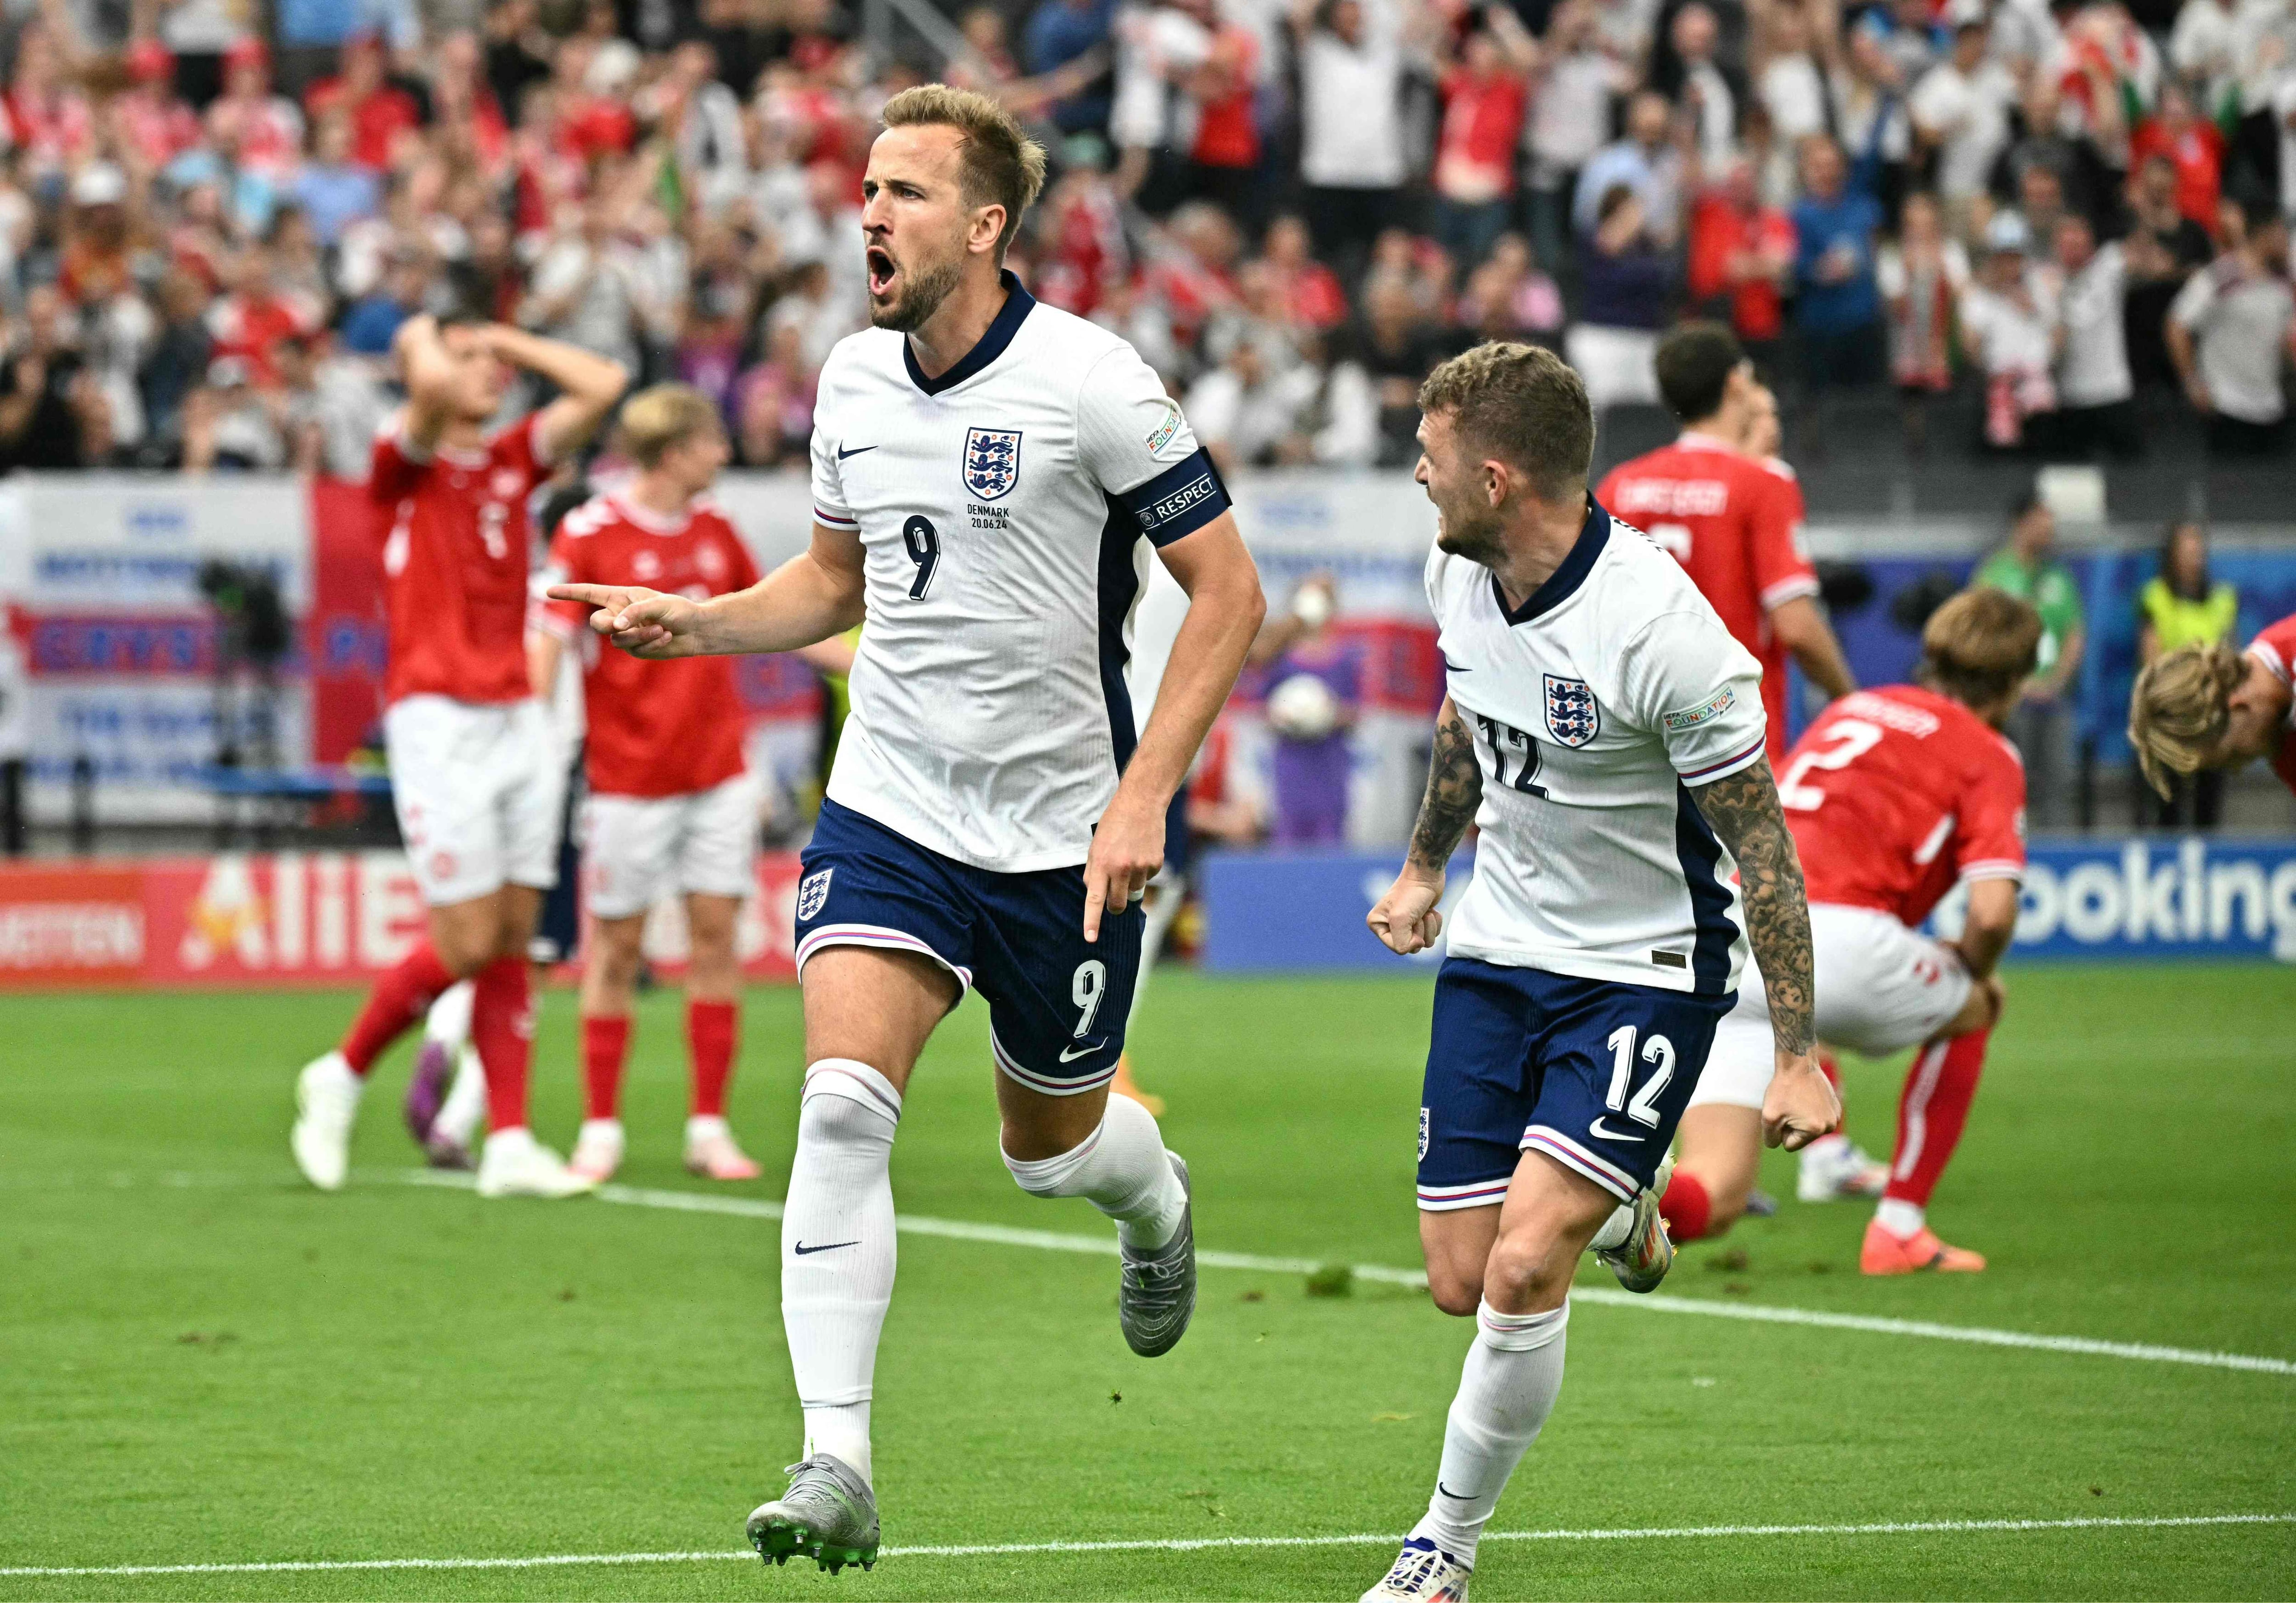 England's forward #09 Harry Kane celebrates scoring his team's first goal next to England's defender #12 Kieran Trippier (R) during the UEFA Euro 2024 Group C football match between Denmark and England at the Frankfurt Arena in Frankfurt am Main on June 20, 2024. (Photo by JAVIER SORIANO / AFP)